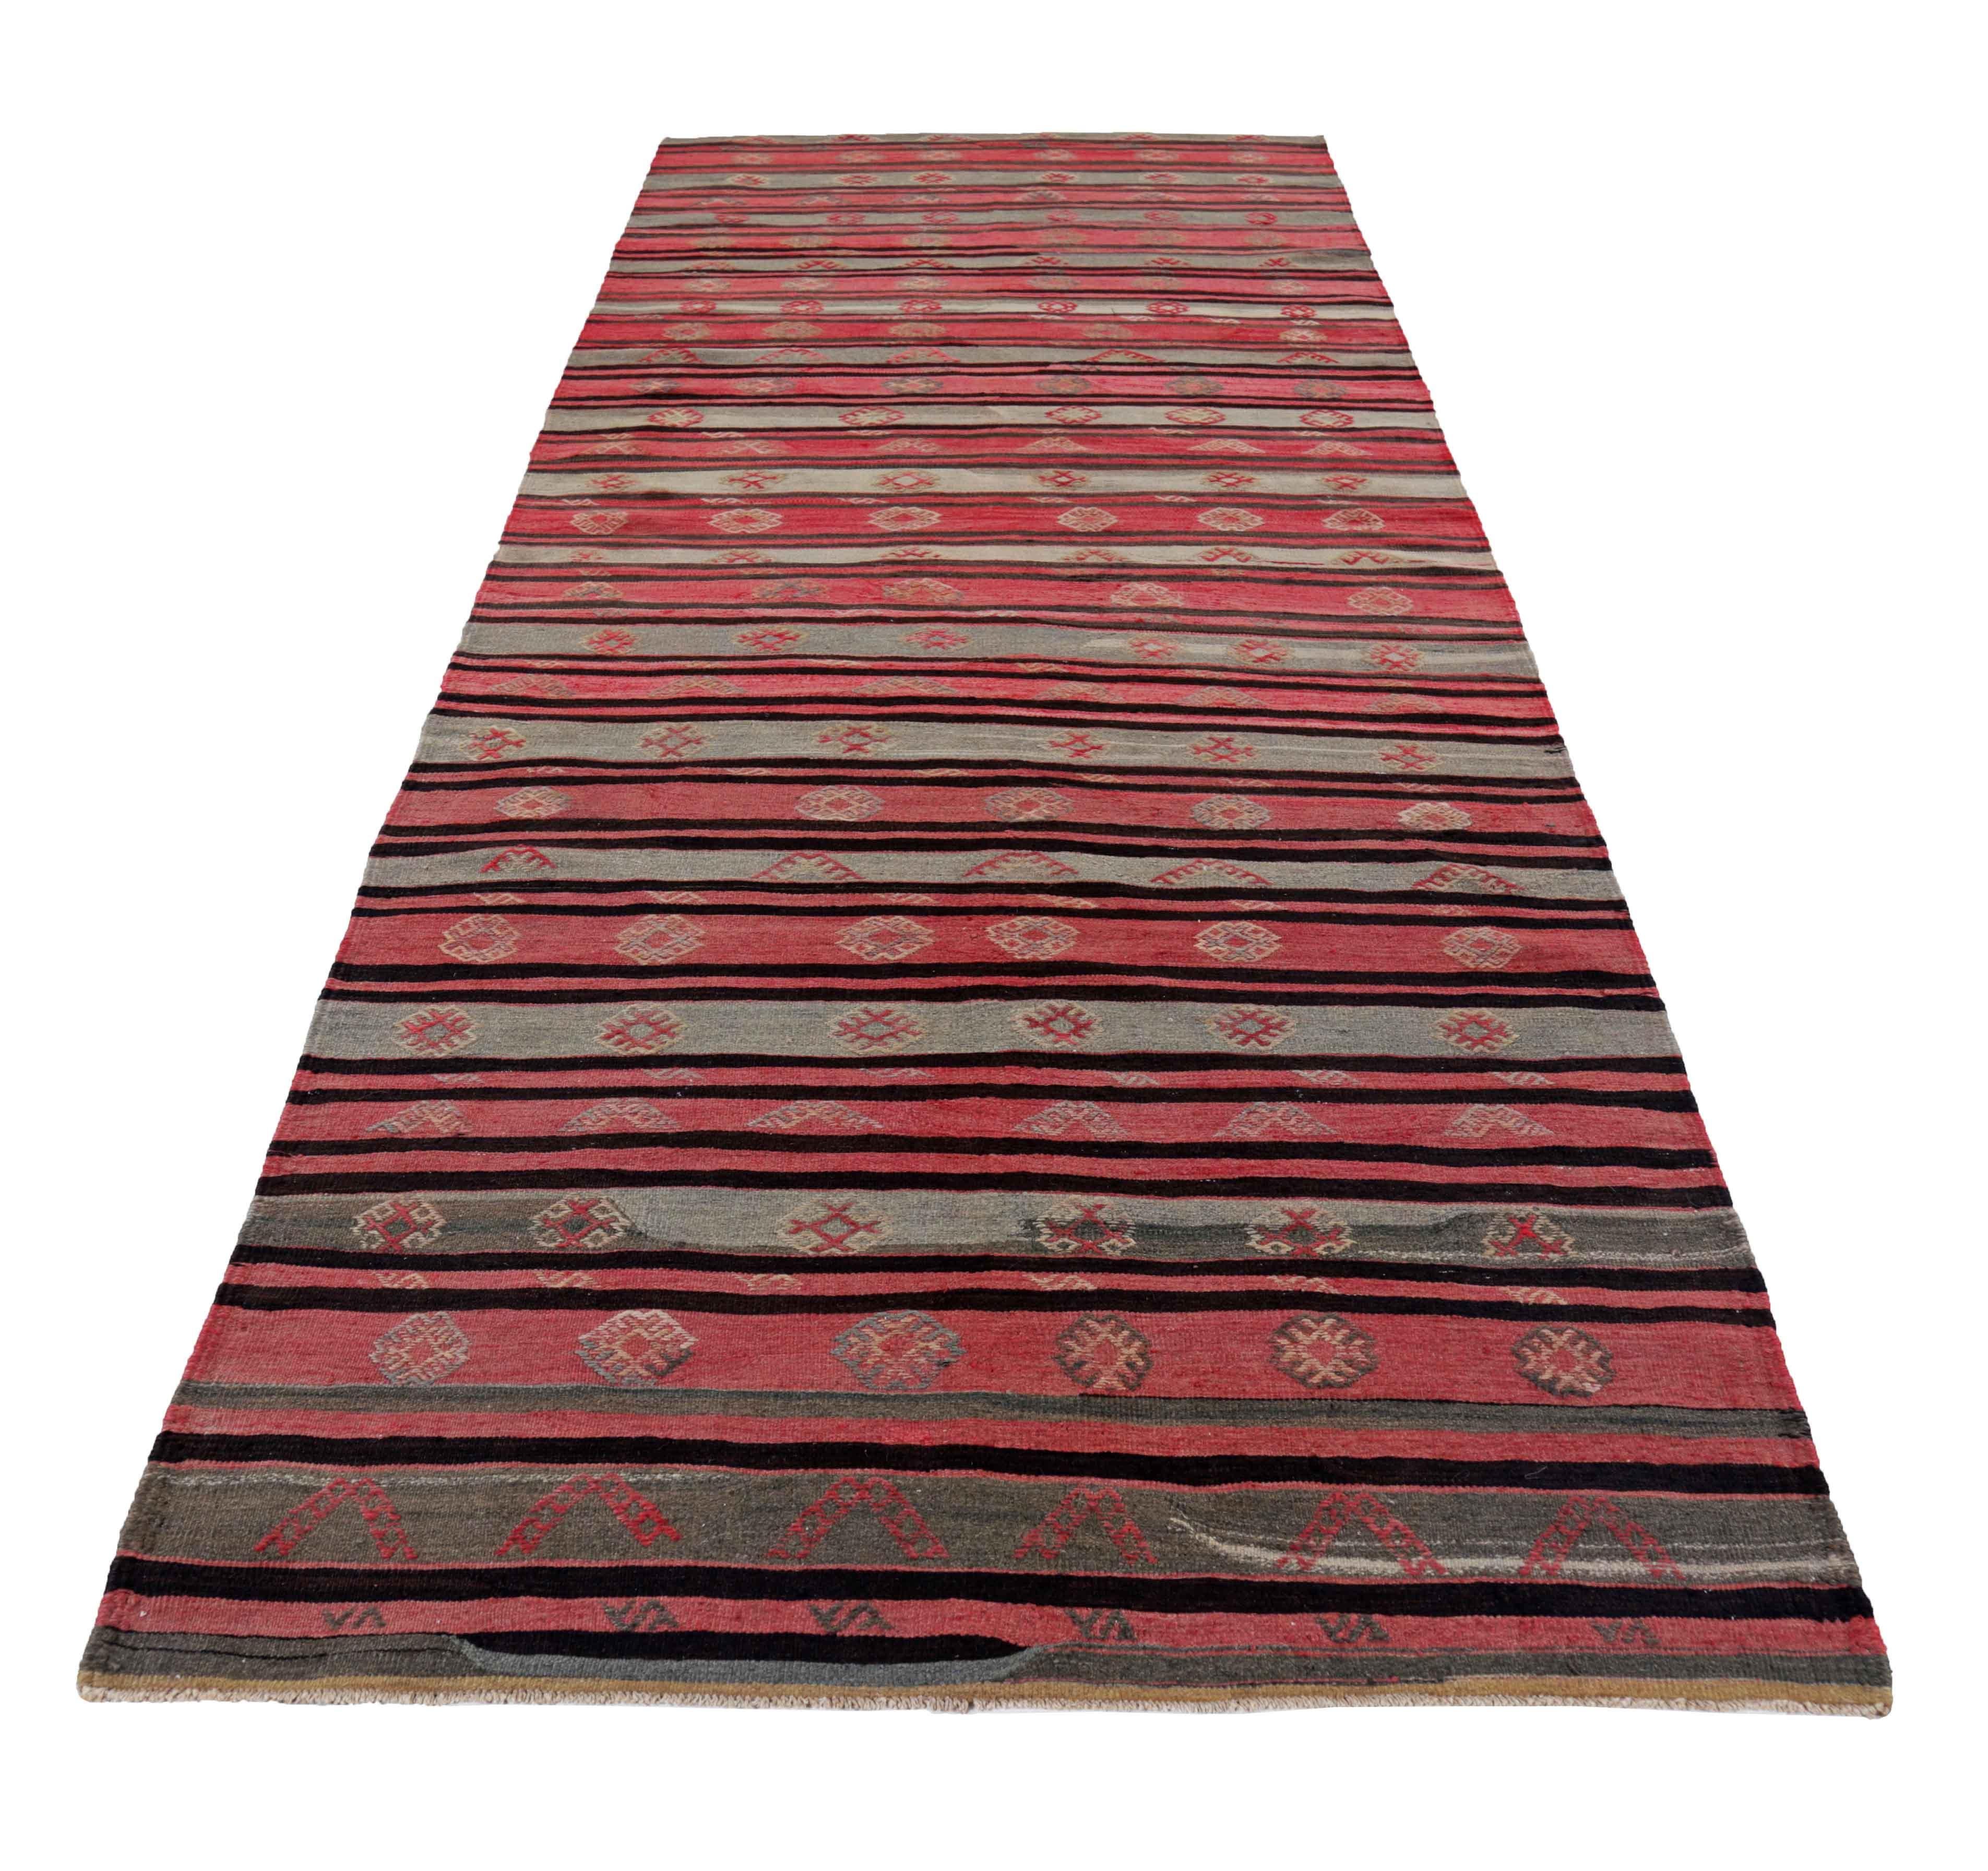 ntique Persian area rug handwoven from the finest sheep’s wool. It’s colored with all-natural vegetable dyes that are safe for humans and pets. It’s a traditional Kilim design handwoven by expert artisans. It’s a lovely area rug that can be